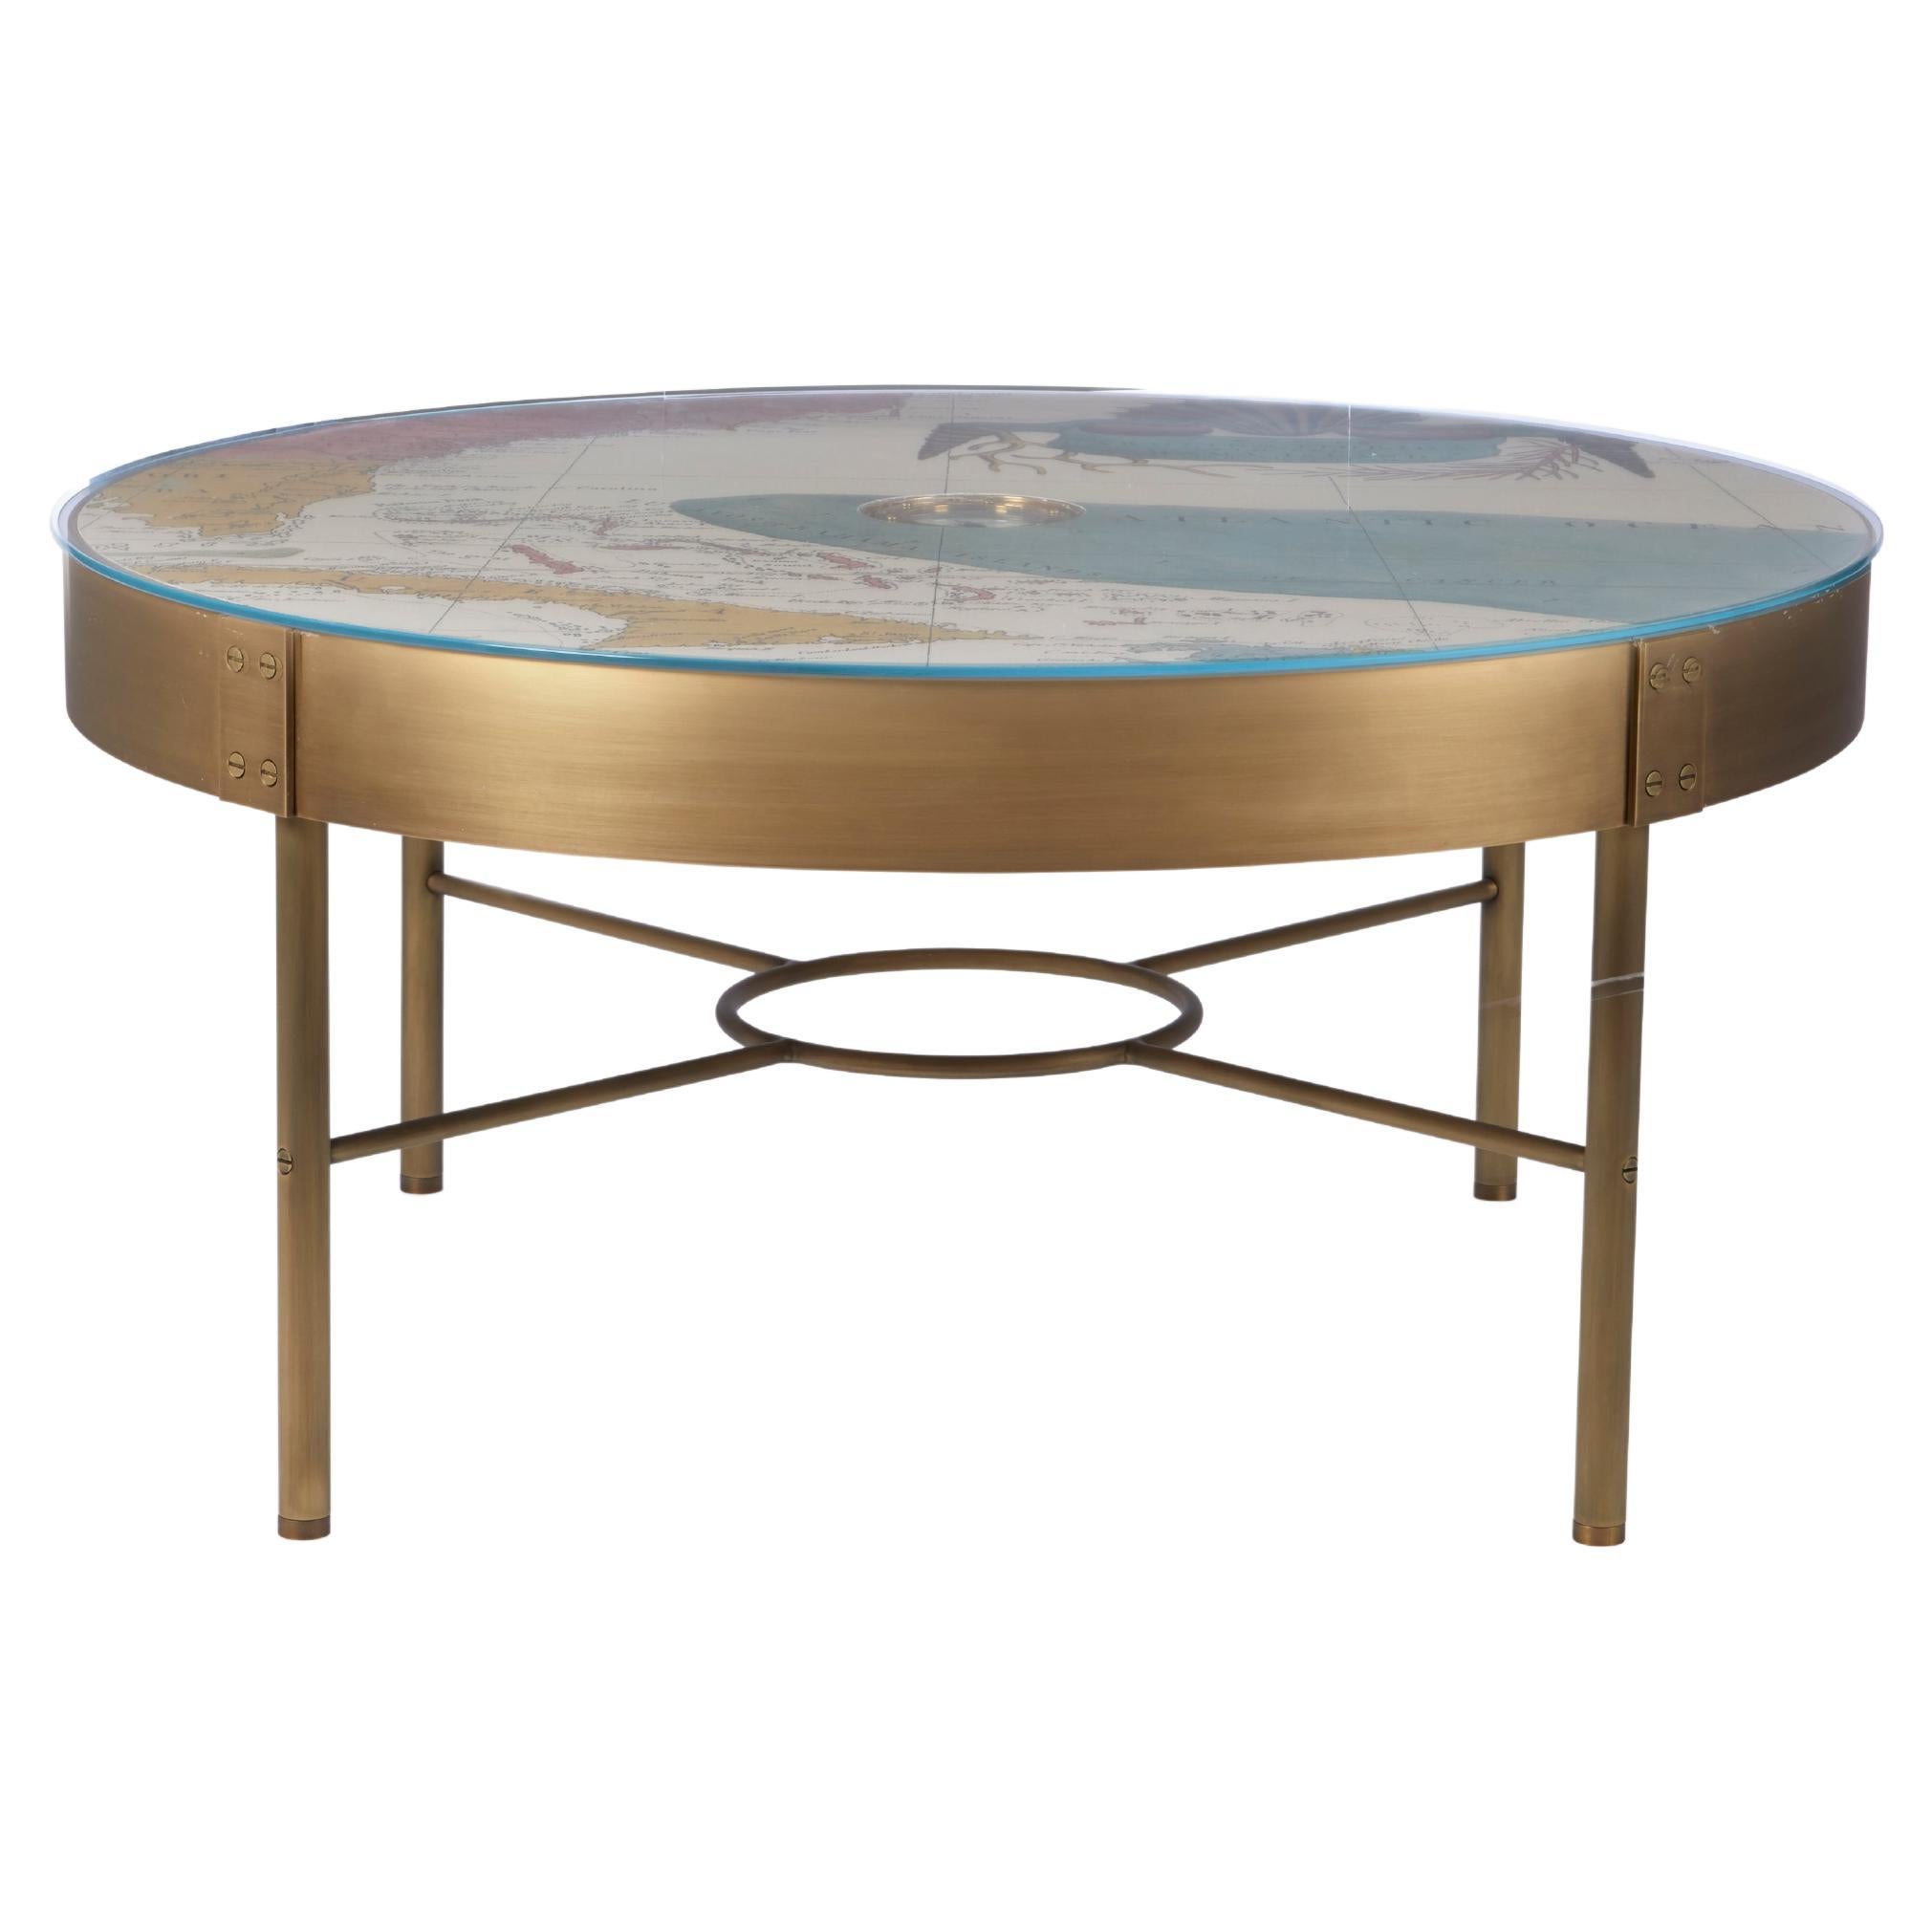 Catesby Map Table by David Duncan Studio